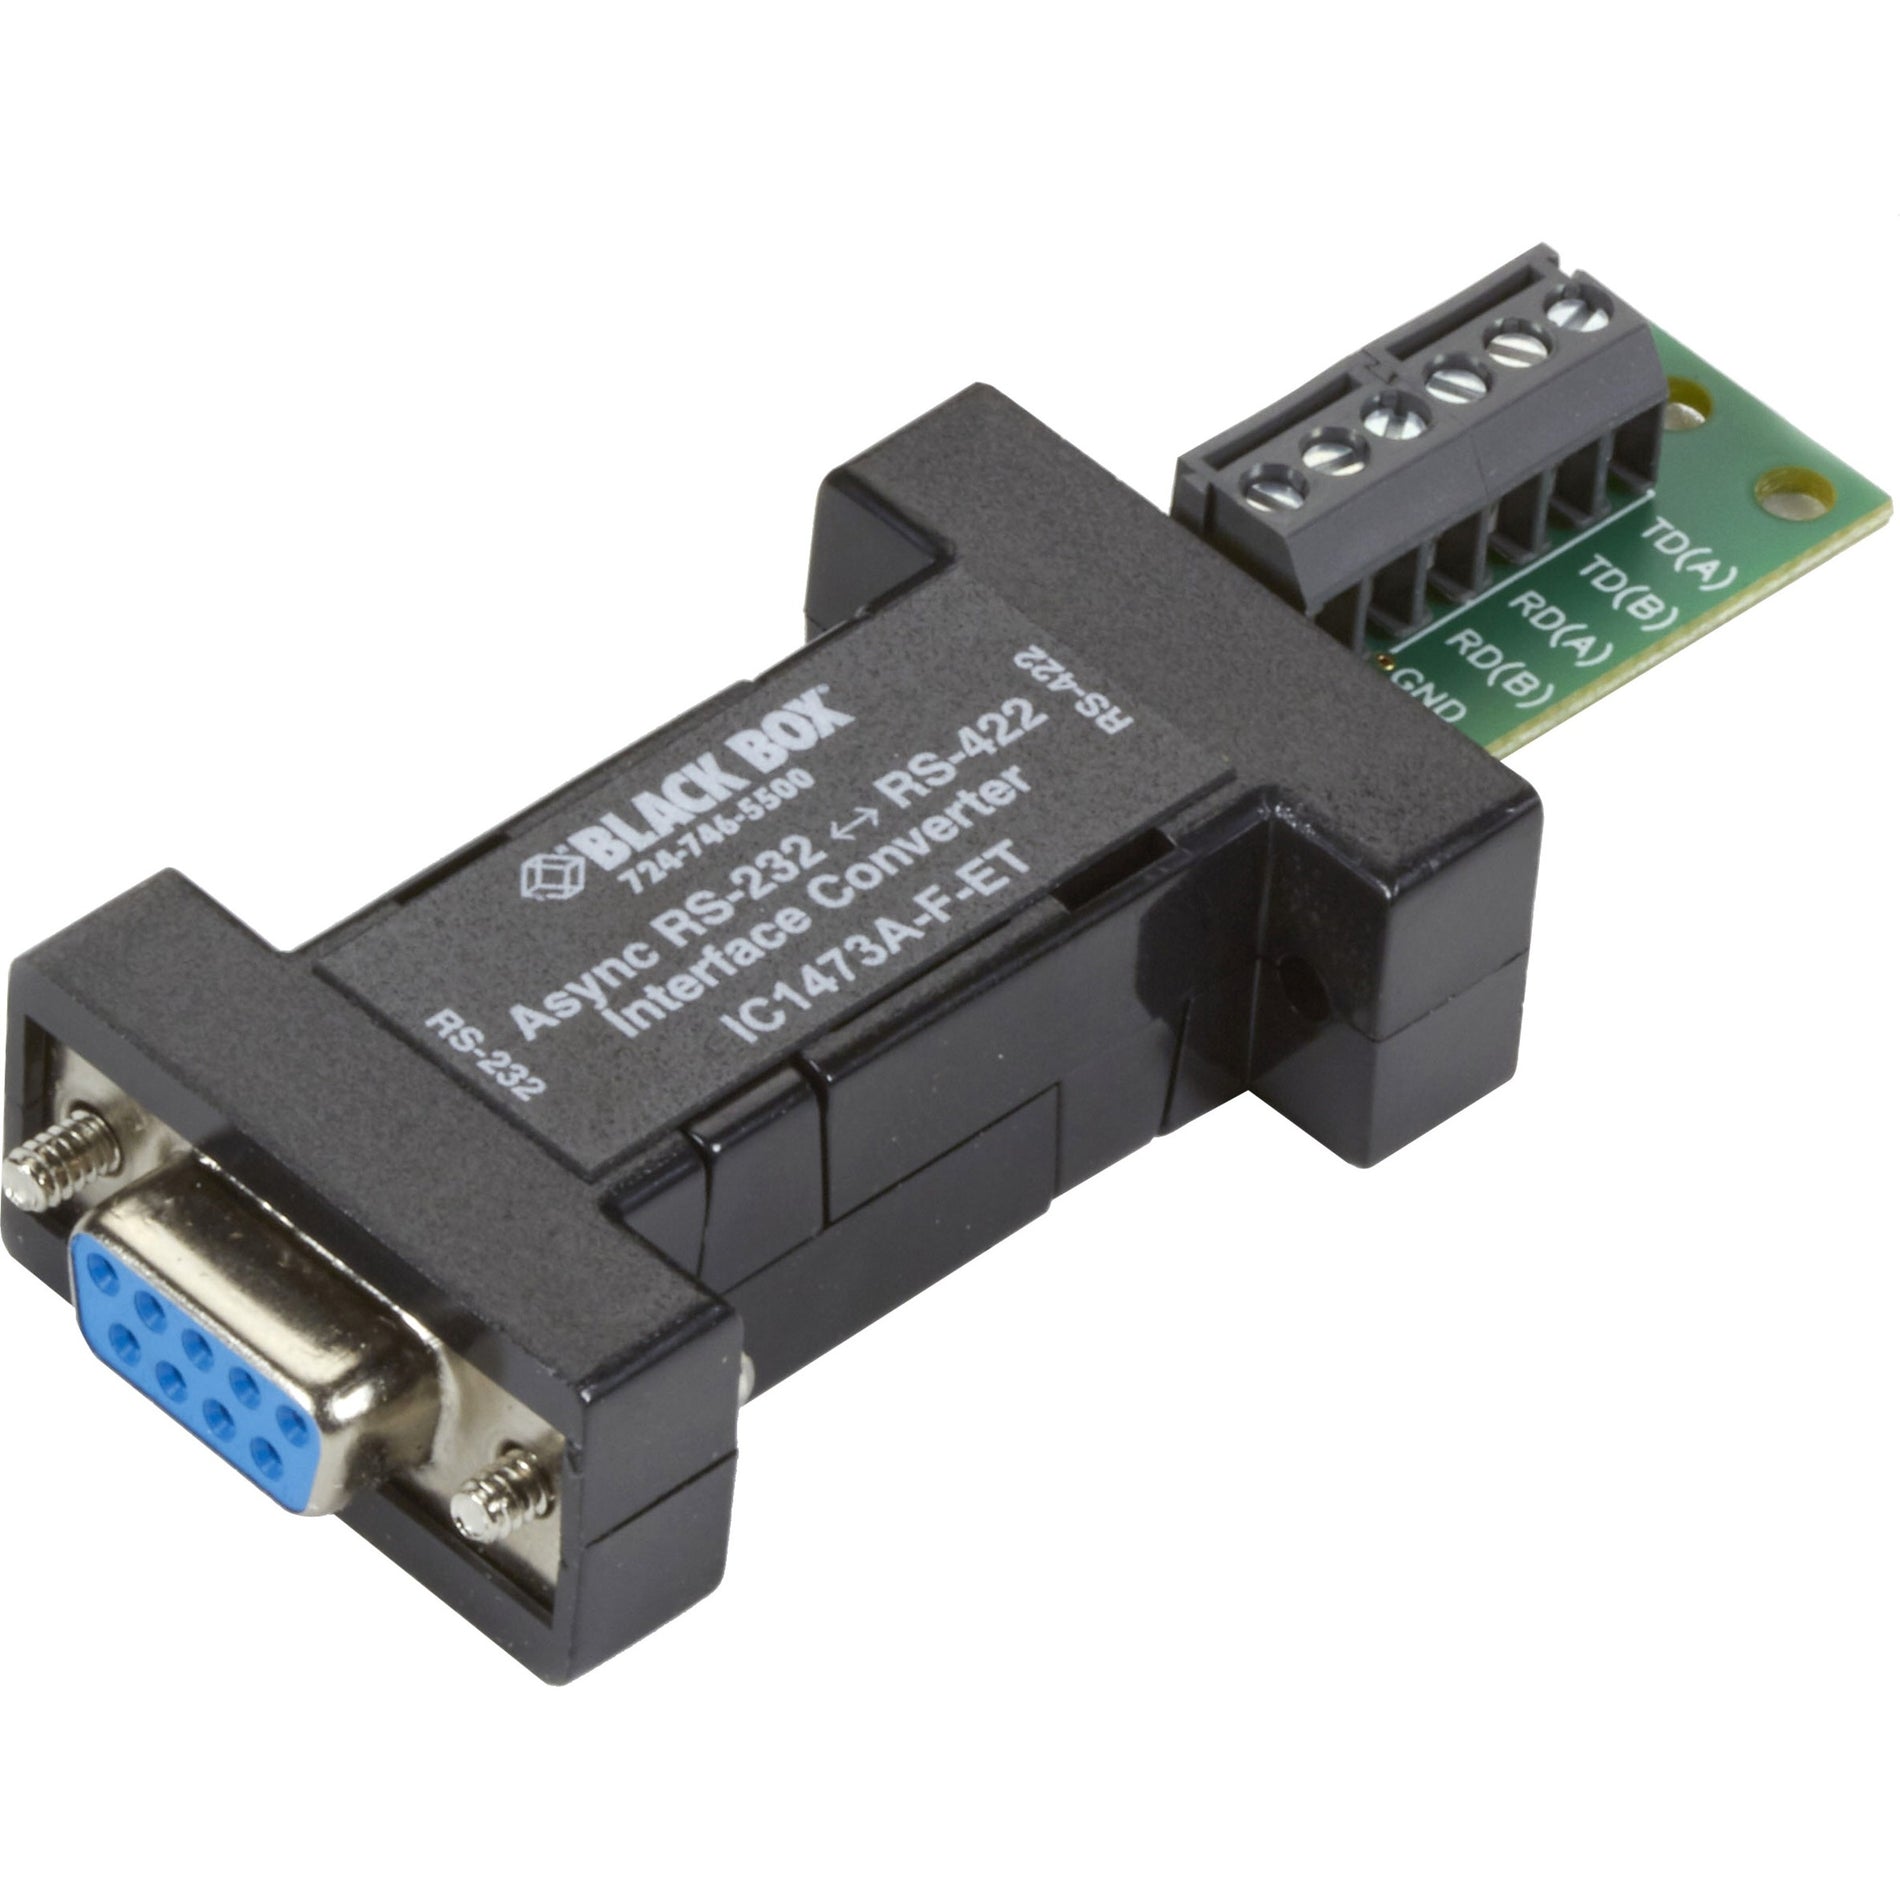 Black Box IC1473A-F-ET Async RS-232 to RS-422 Interface Converter - DB9 to Terminal Block, Data Transfer Adapter